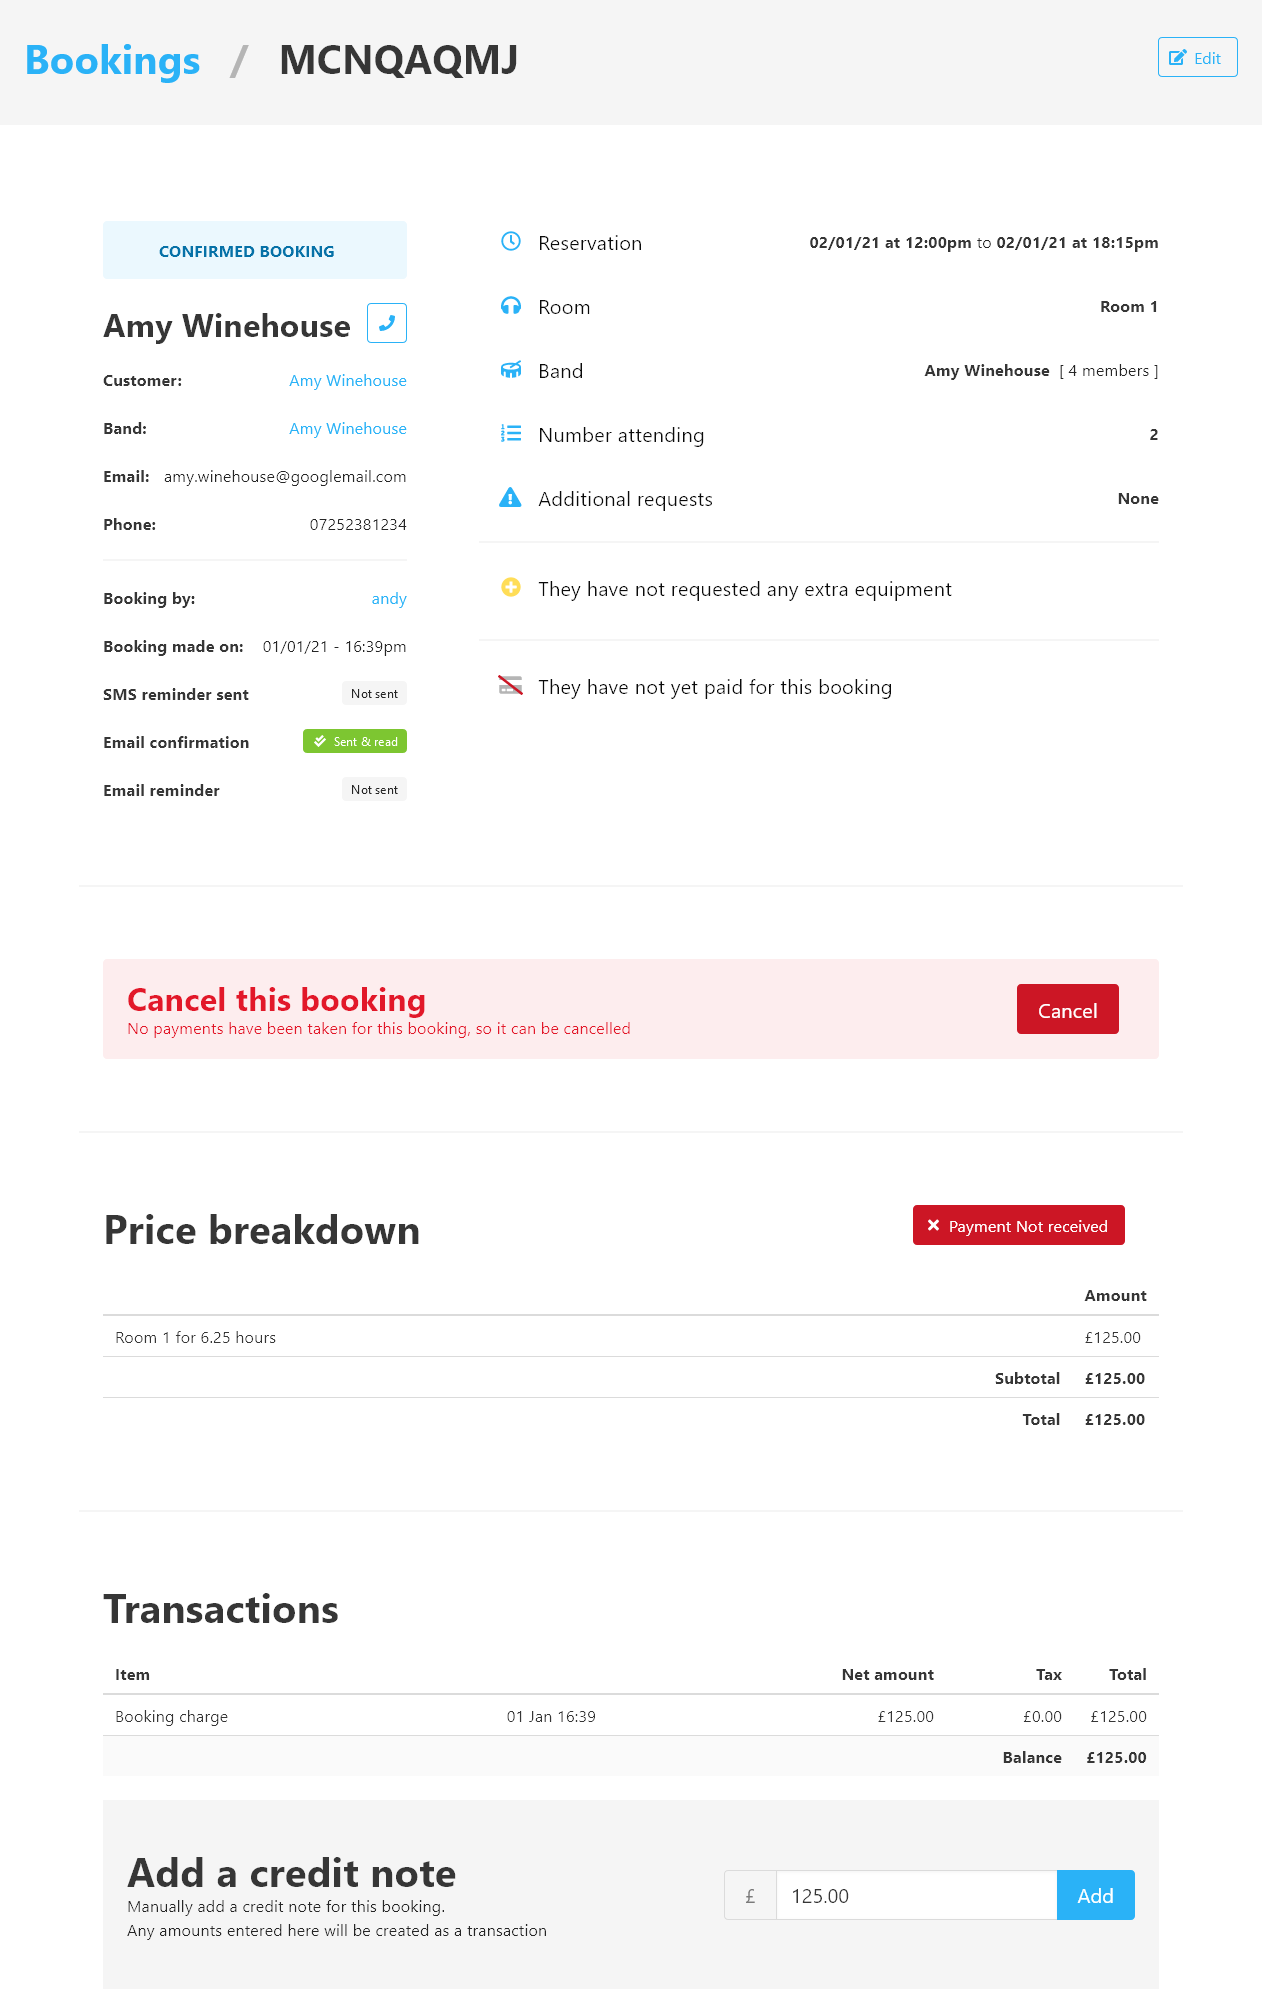 Booking details overview